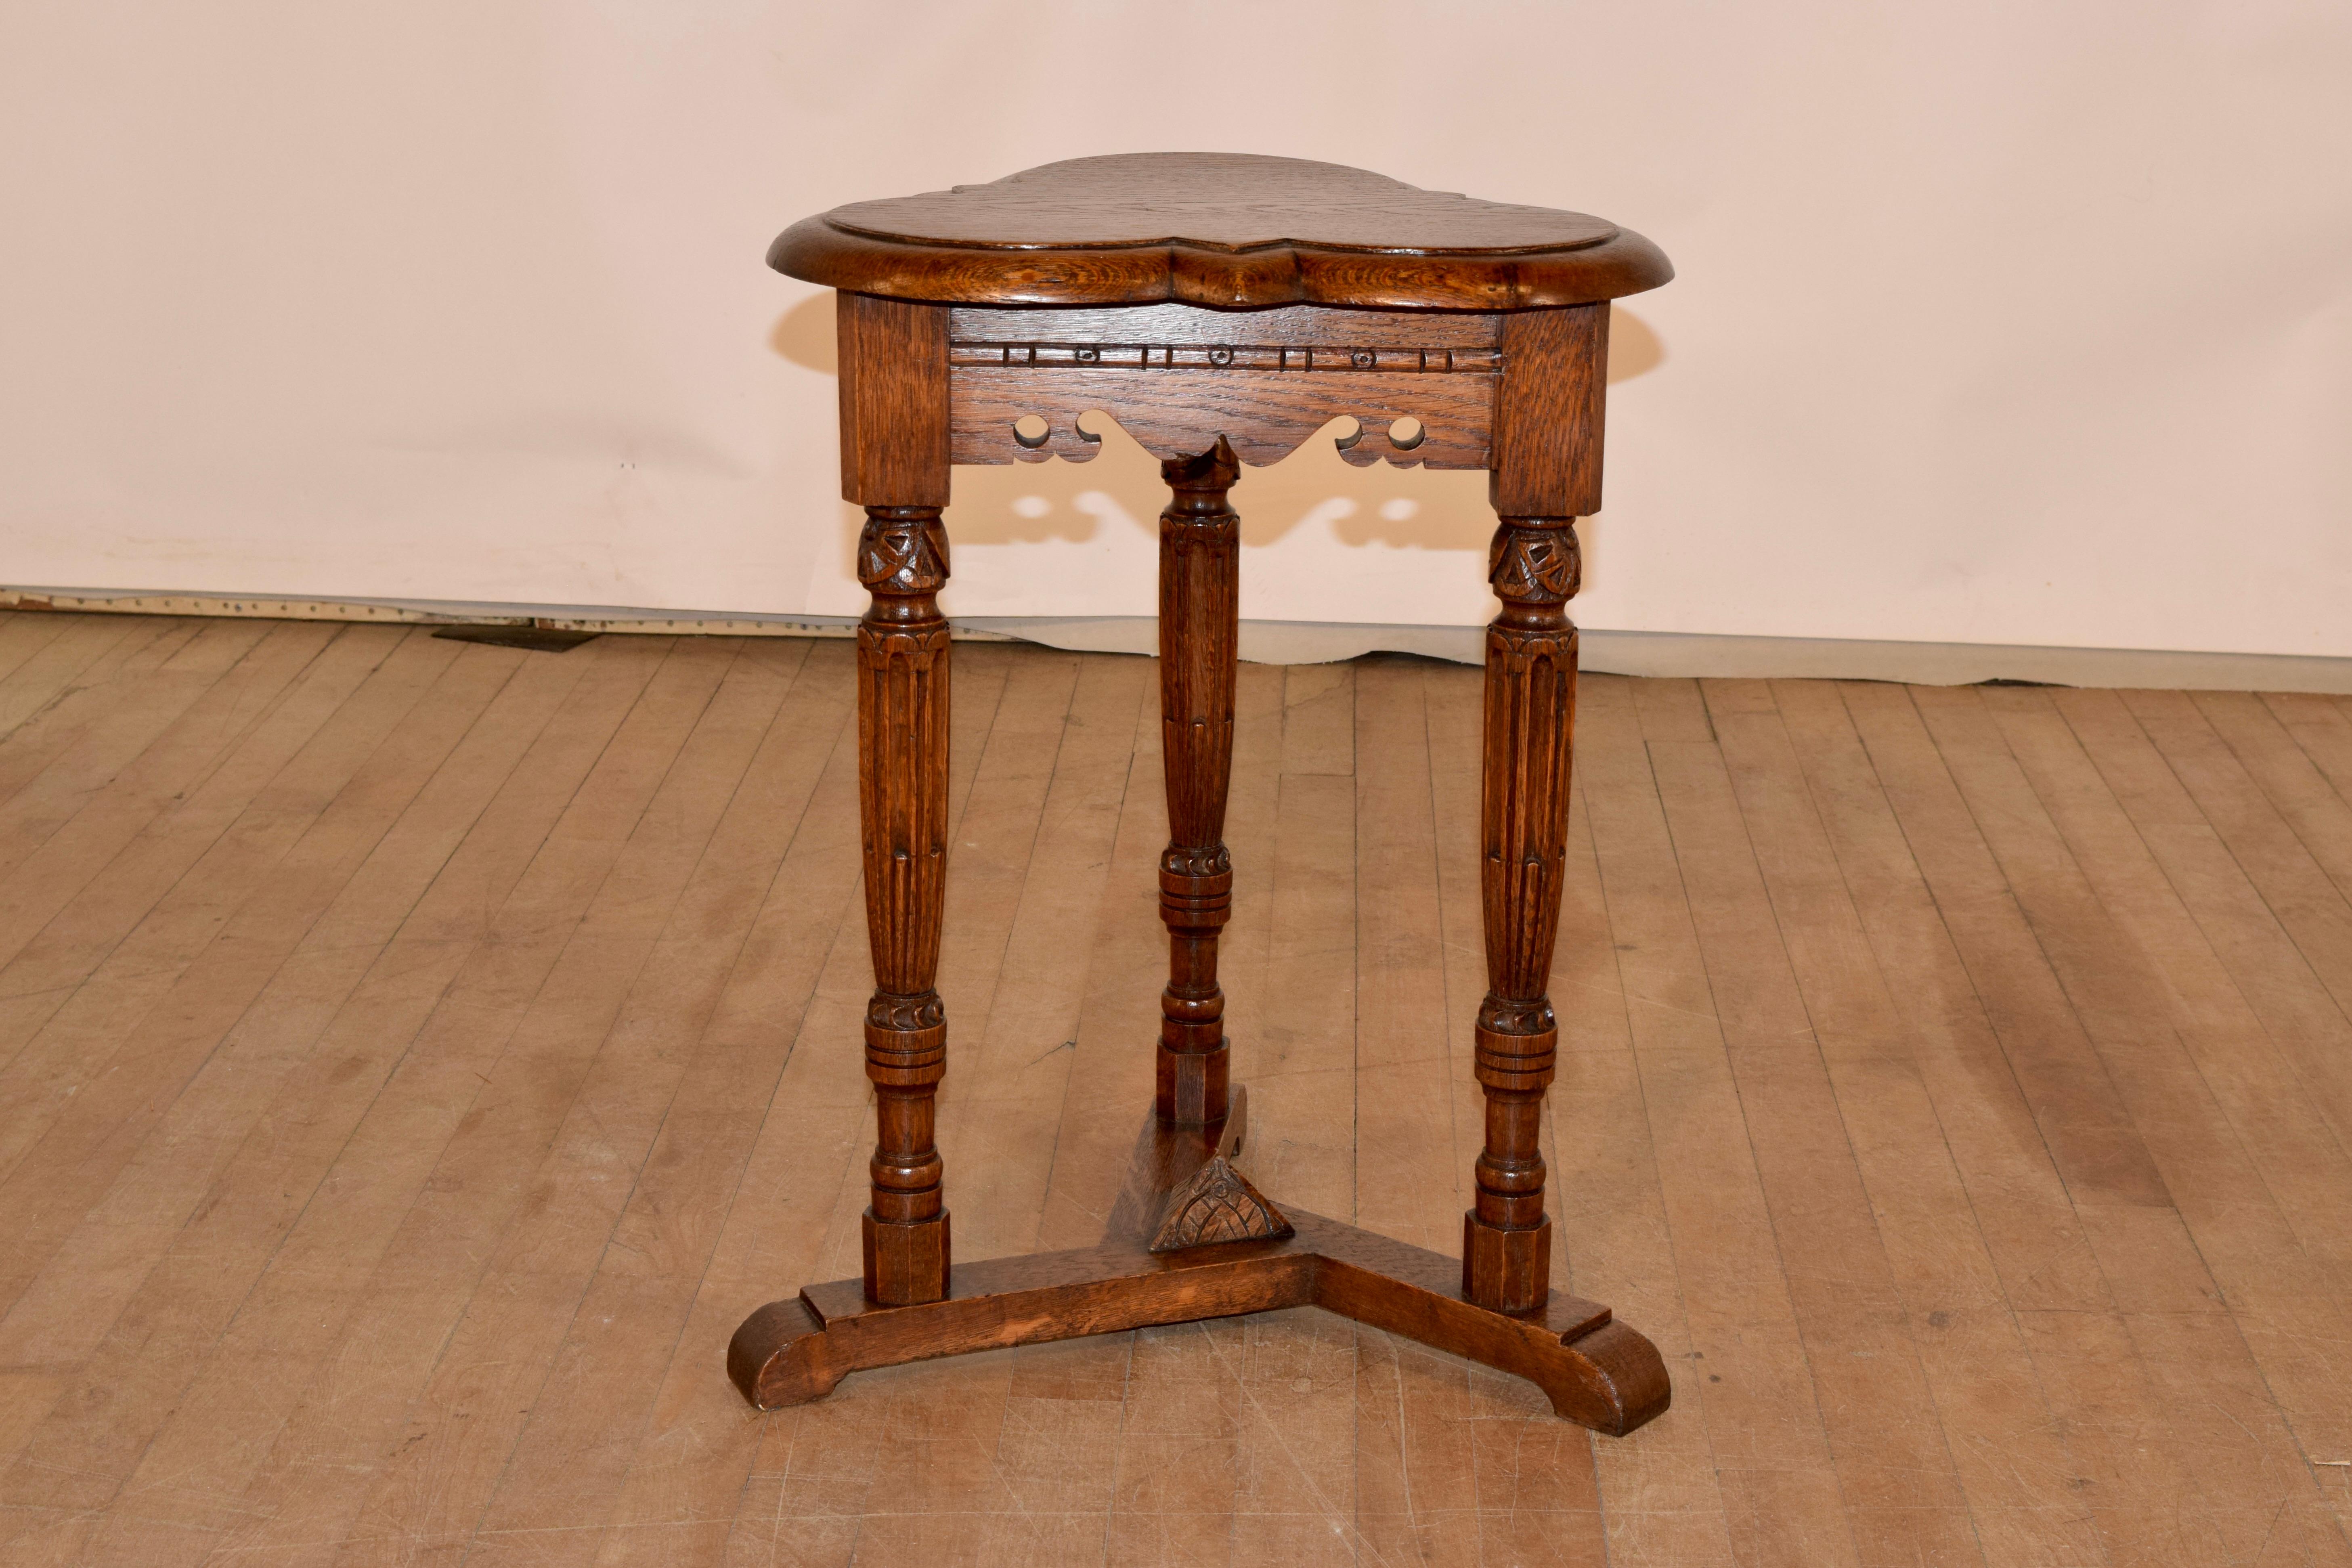 19th century oak side table from England with a scalloped and beveled edge around the top, following down to a scalloped and pierced apron. the table is supported on hand turned and carved fluted legs, over a tripod base, which is enhanced by a